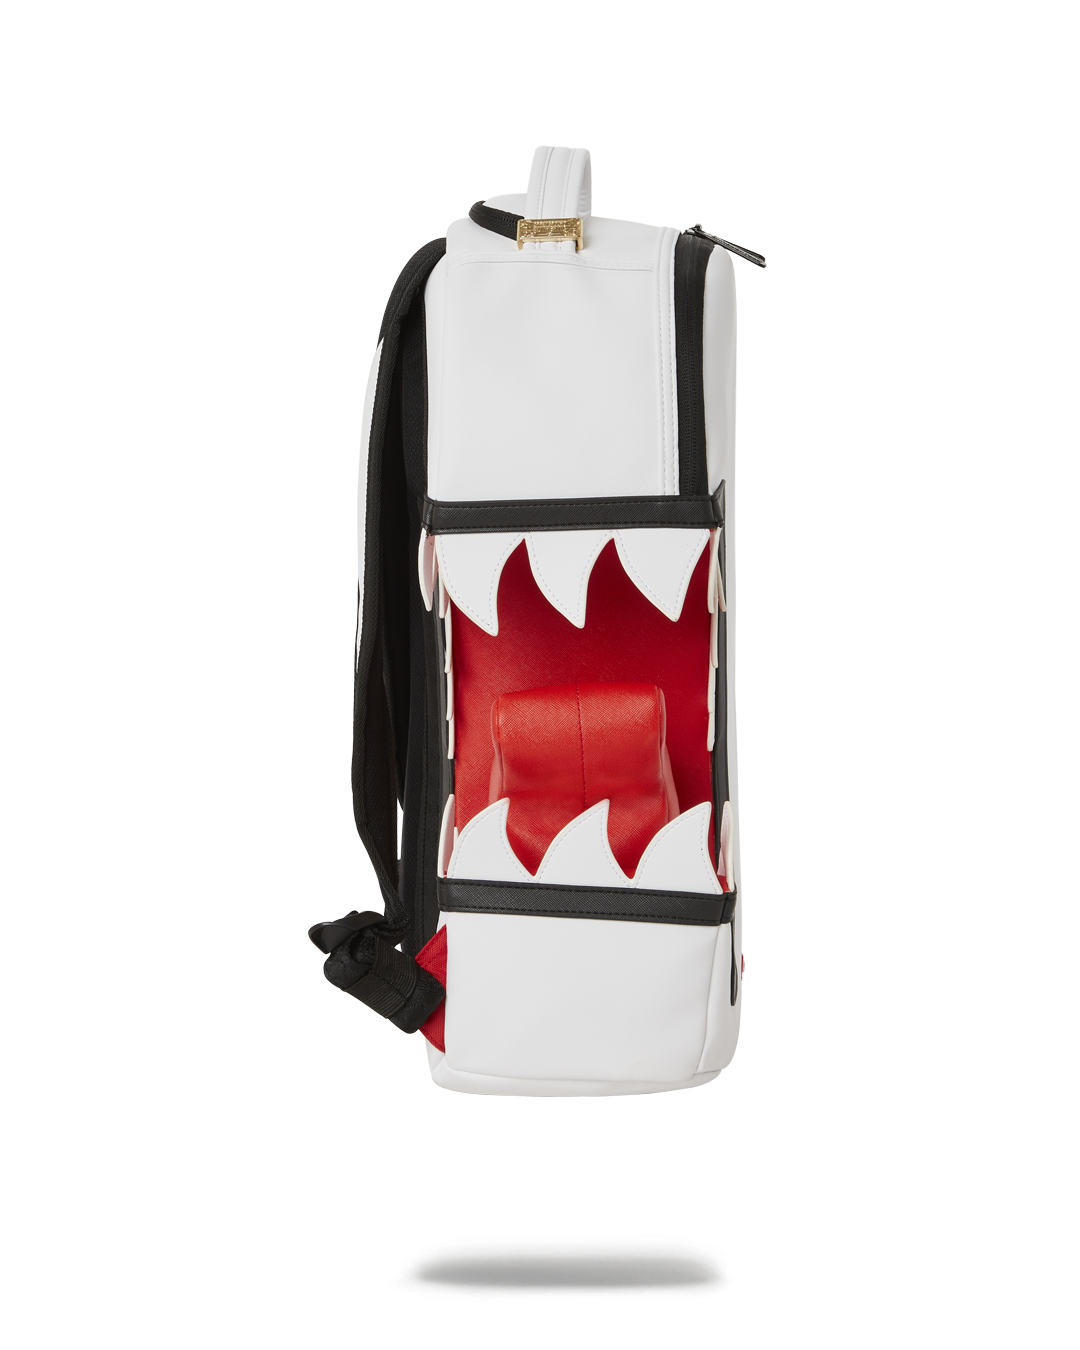 SPRAYGROUND: backpack in technical fabric with carved shark mouth